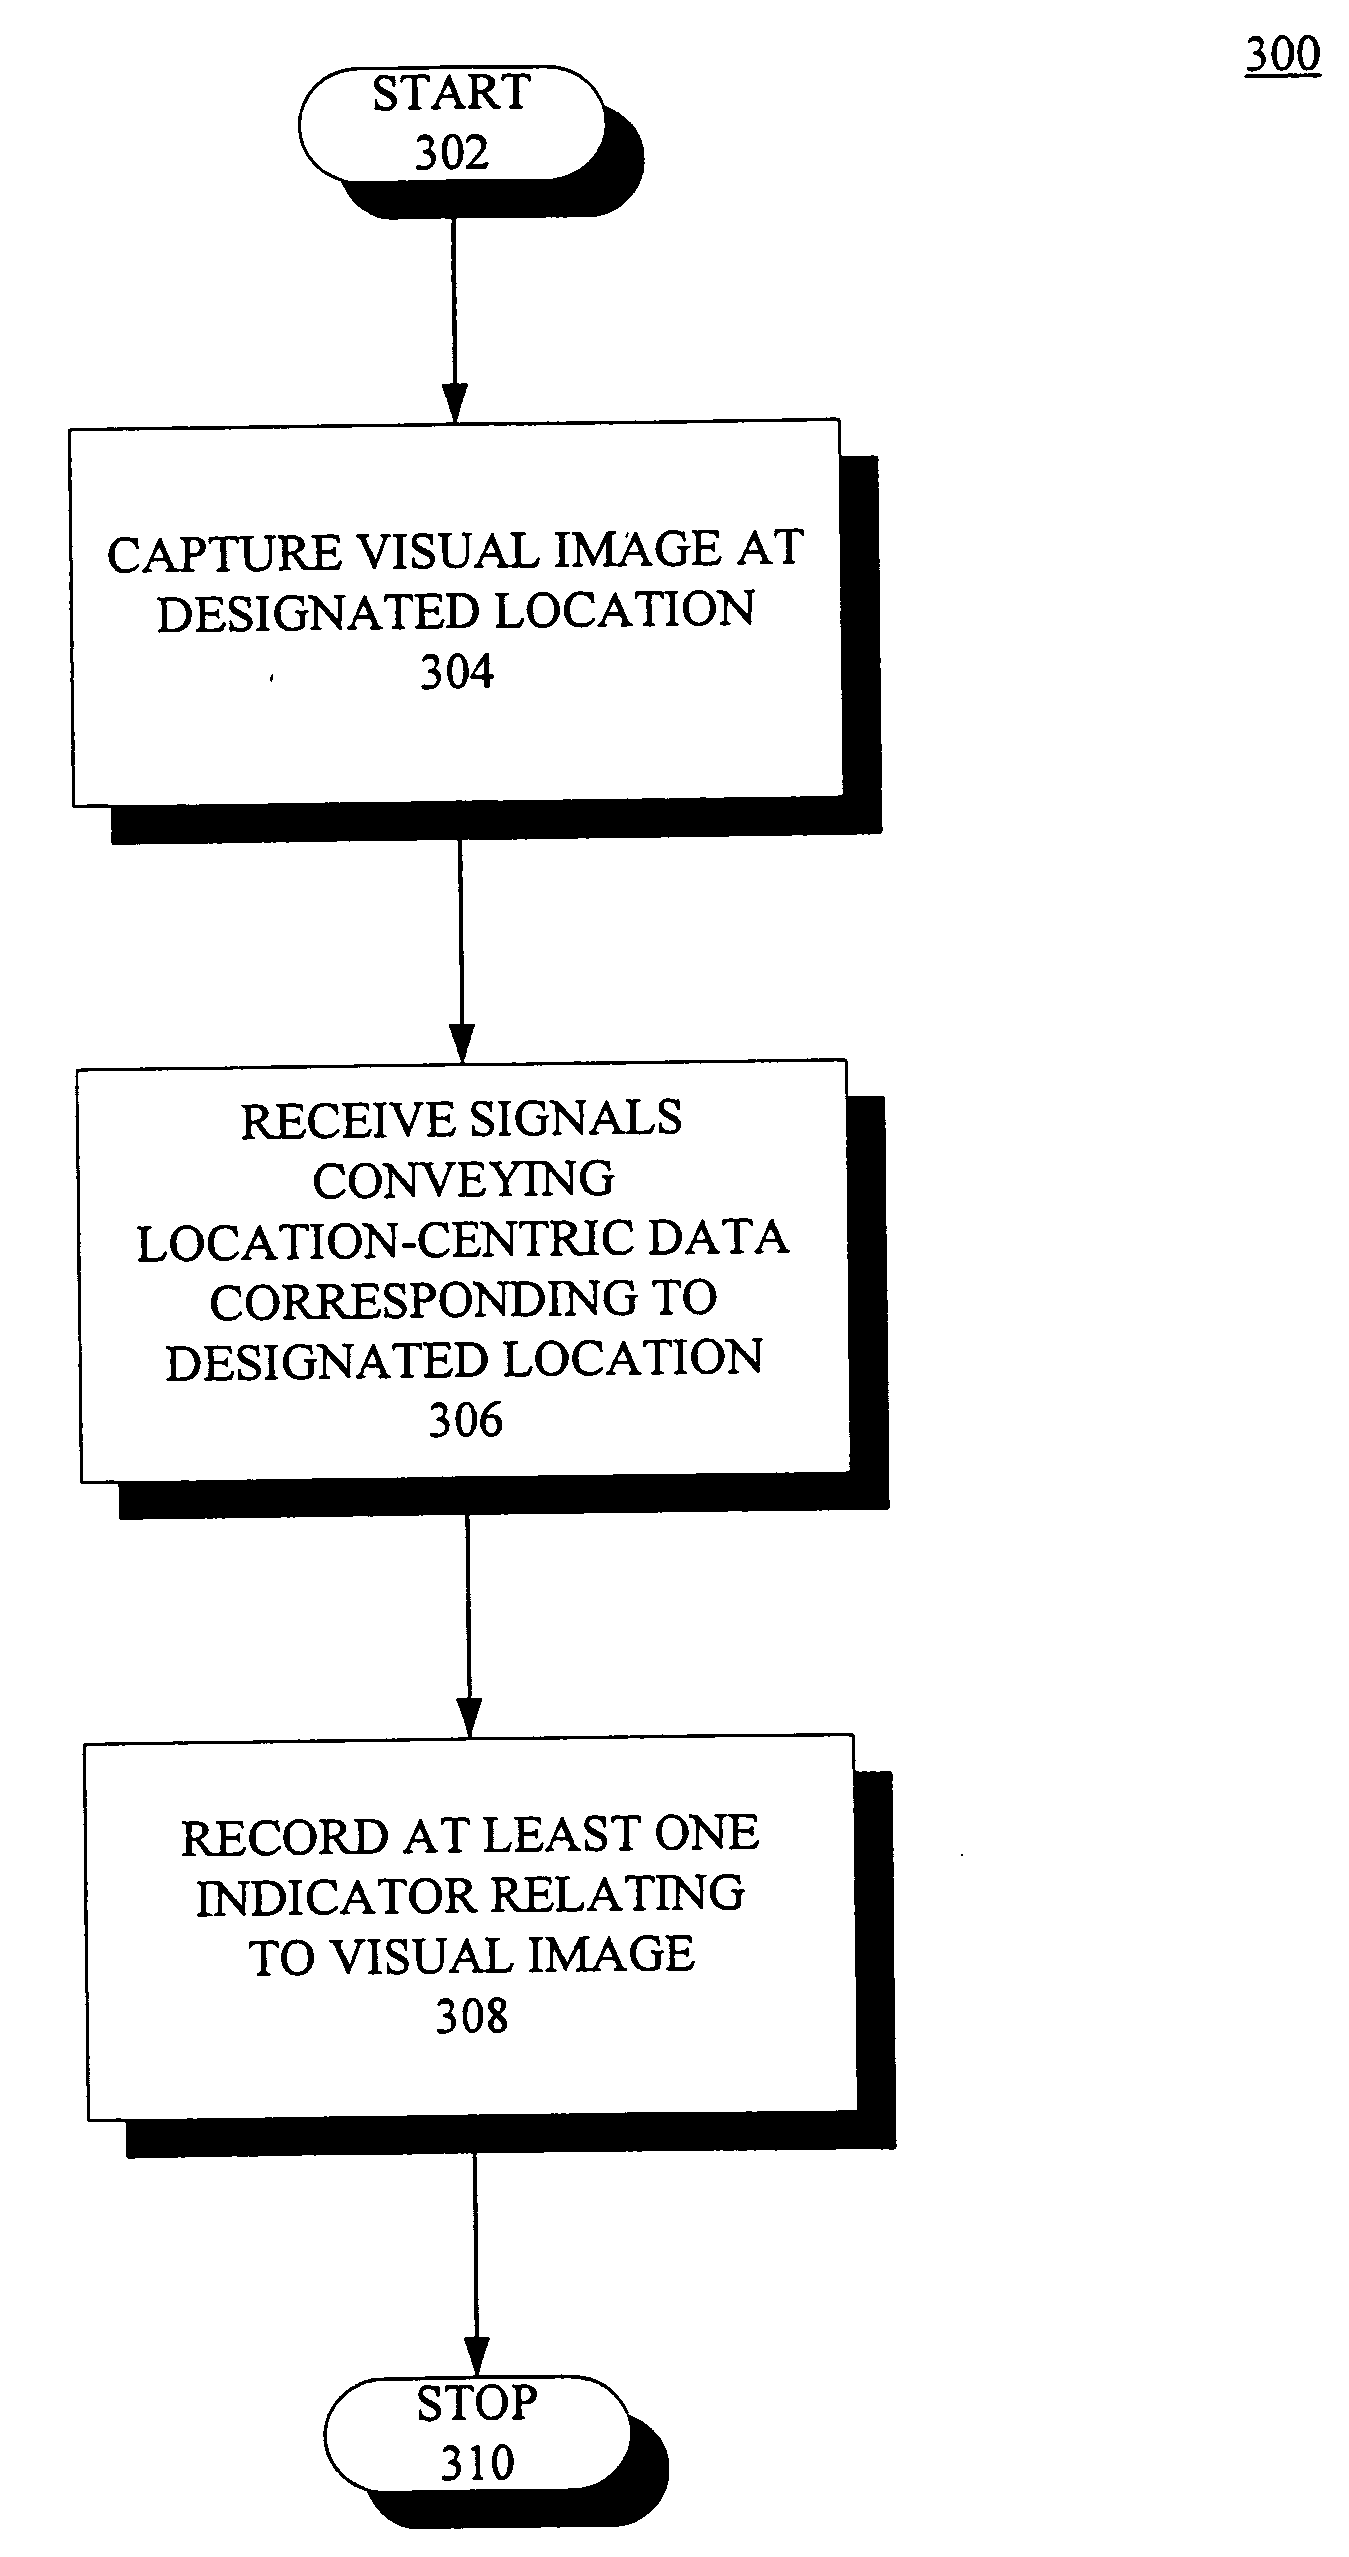 System and methods for acquiring and handling location-centric information and images